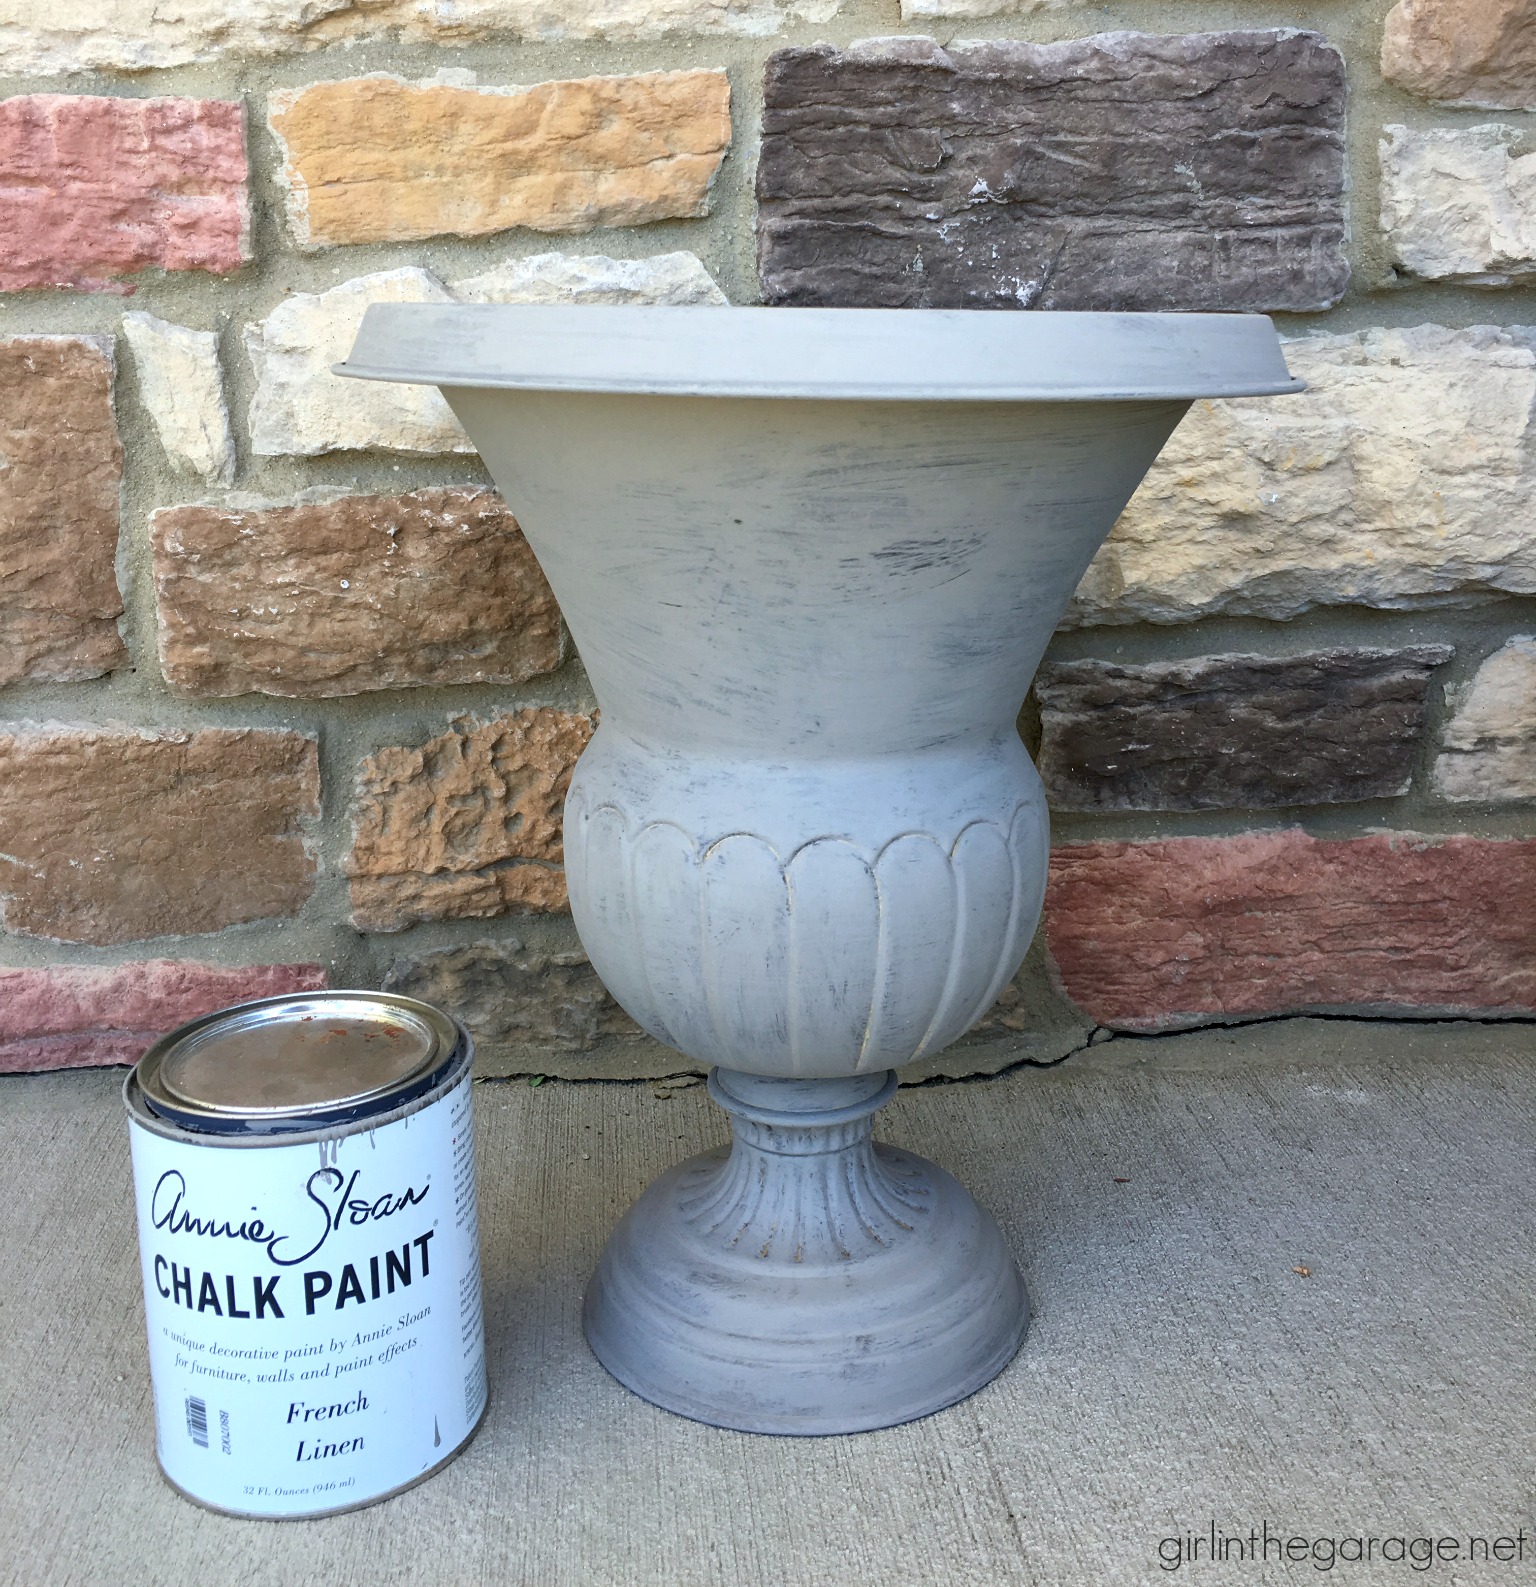 How to paint metal to look like stone - A $1.00 thrifted urn planter makeover DIY tutorial by Girl in the Garage